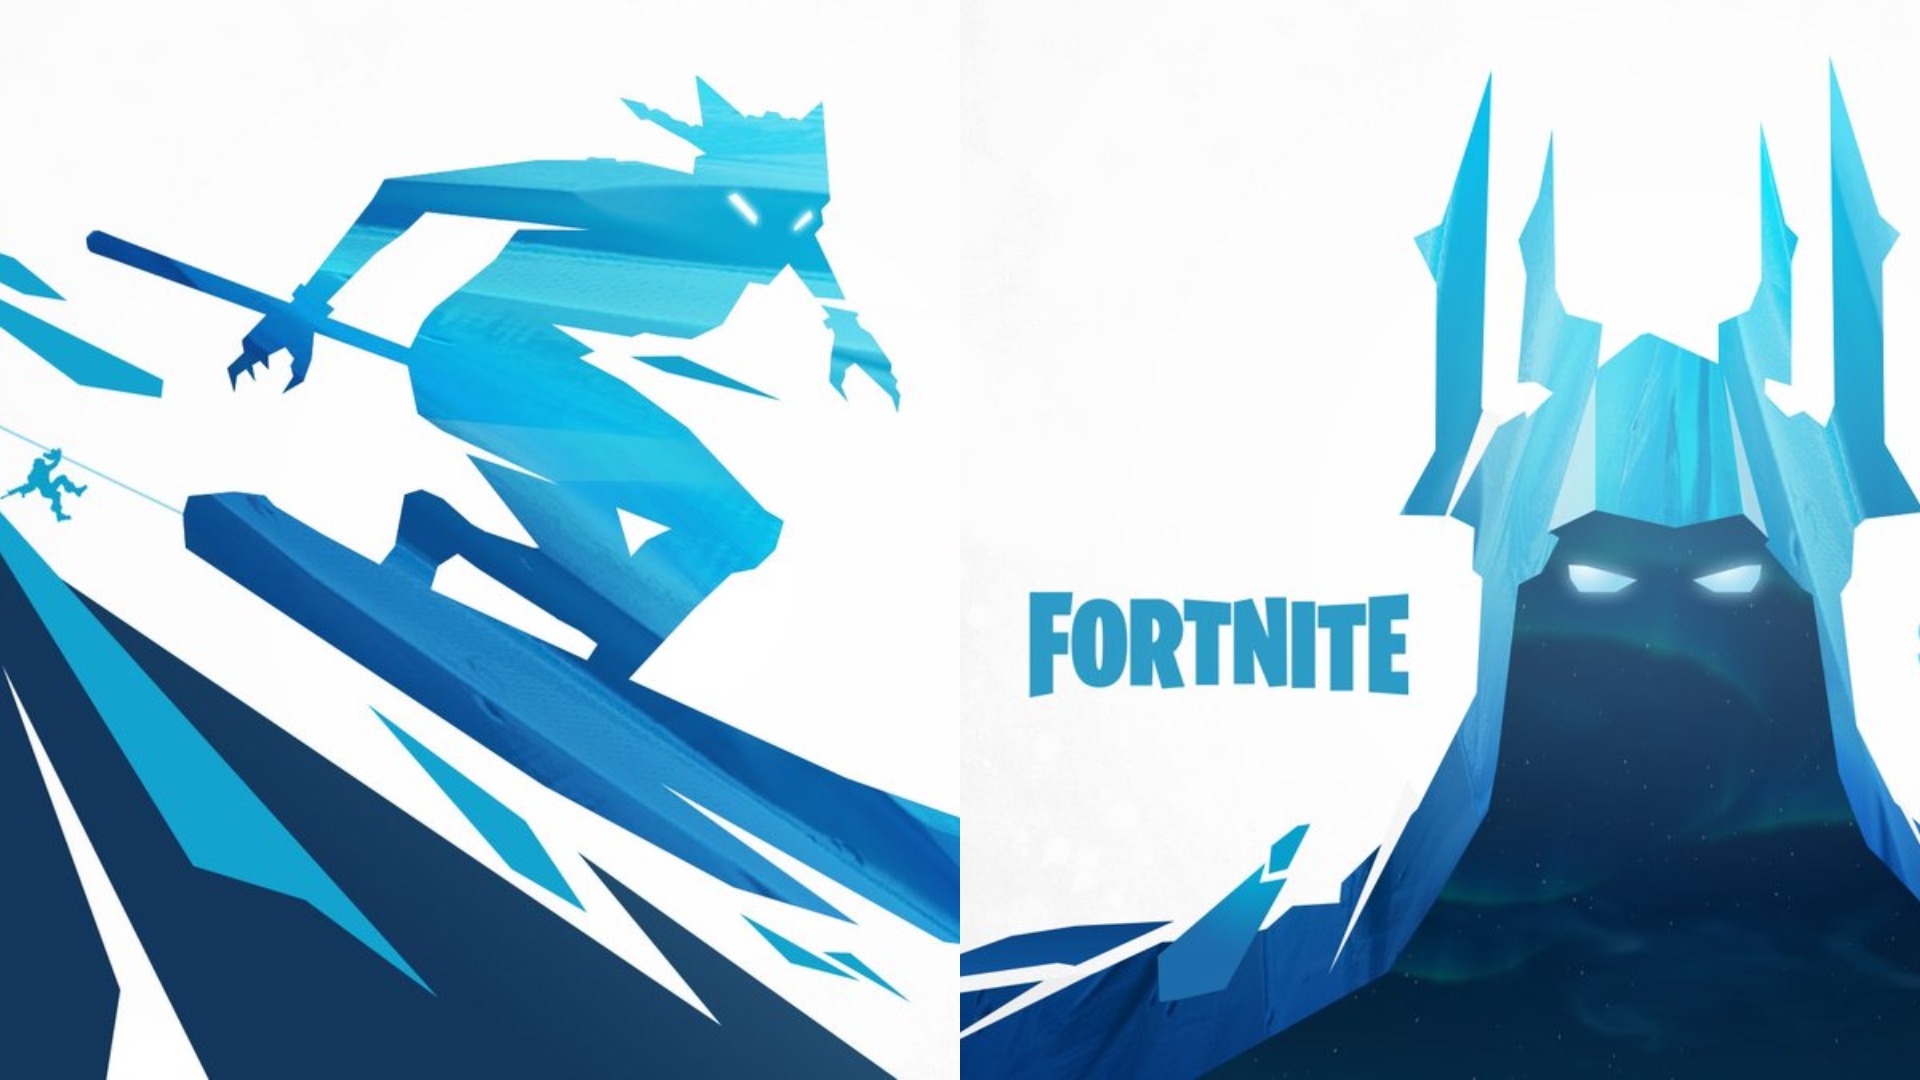 Fortnite Season Skins Teaser And Leaks Confirm New Outfits